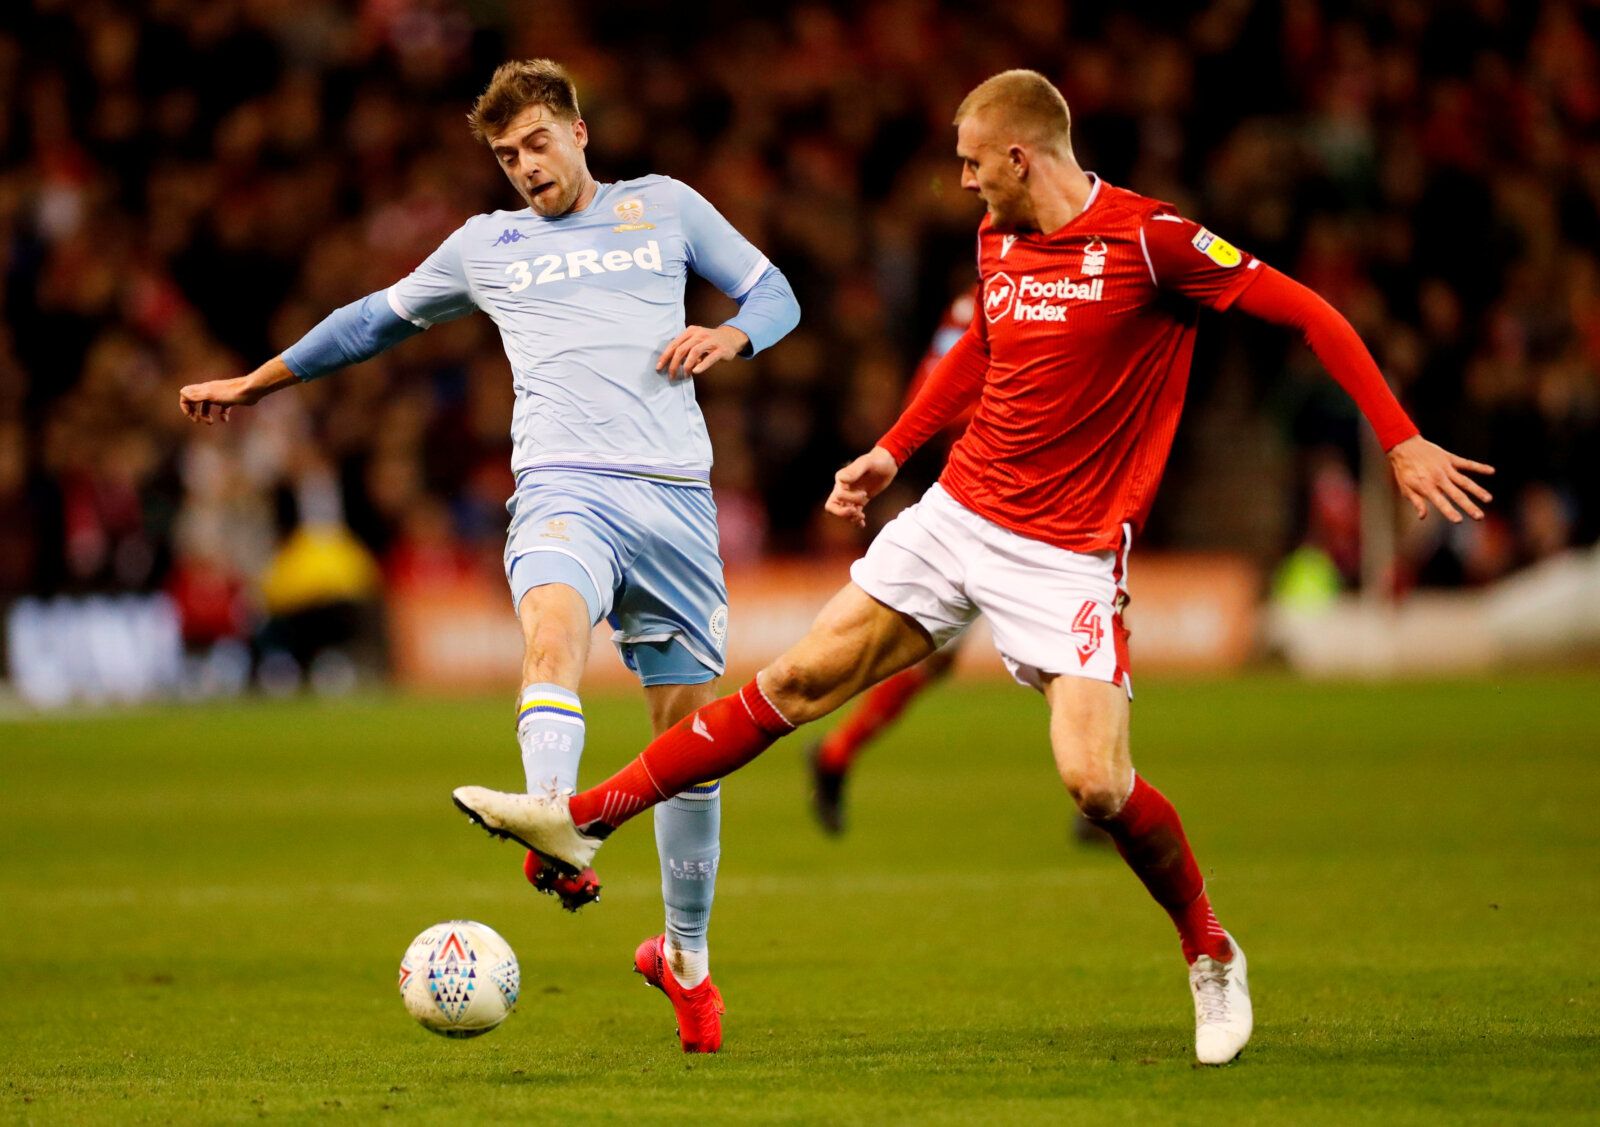 Soccer Football - Championship - Nottingham Forest v Leeds United - The City Ground, Nottingham, Britain - February 8, 2020  Nottingham Forest's Joe Worrall in action with Leeds United's Patrick Bamford   Action Images/Andrew Boyers  EDITORIAL USE ONLY. No use with unauthorized audio, video, data, fixture lists, club/league logos or 